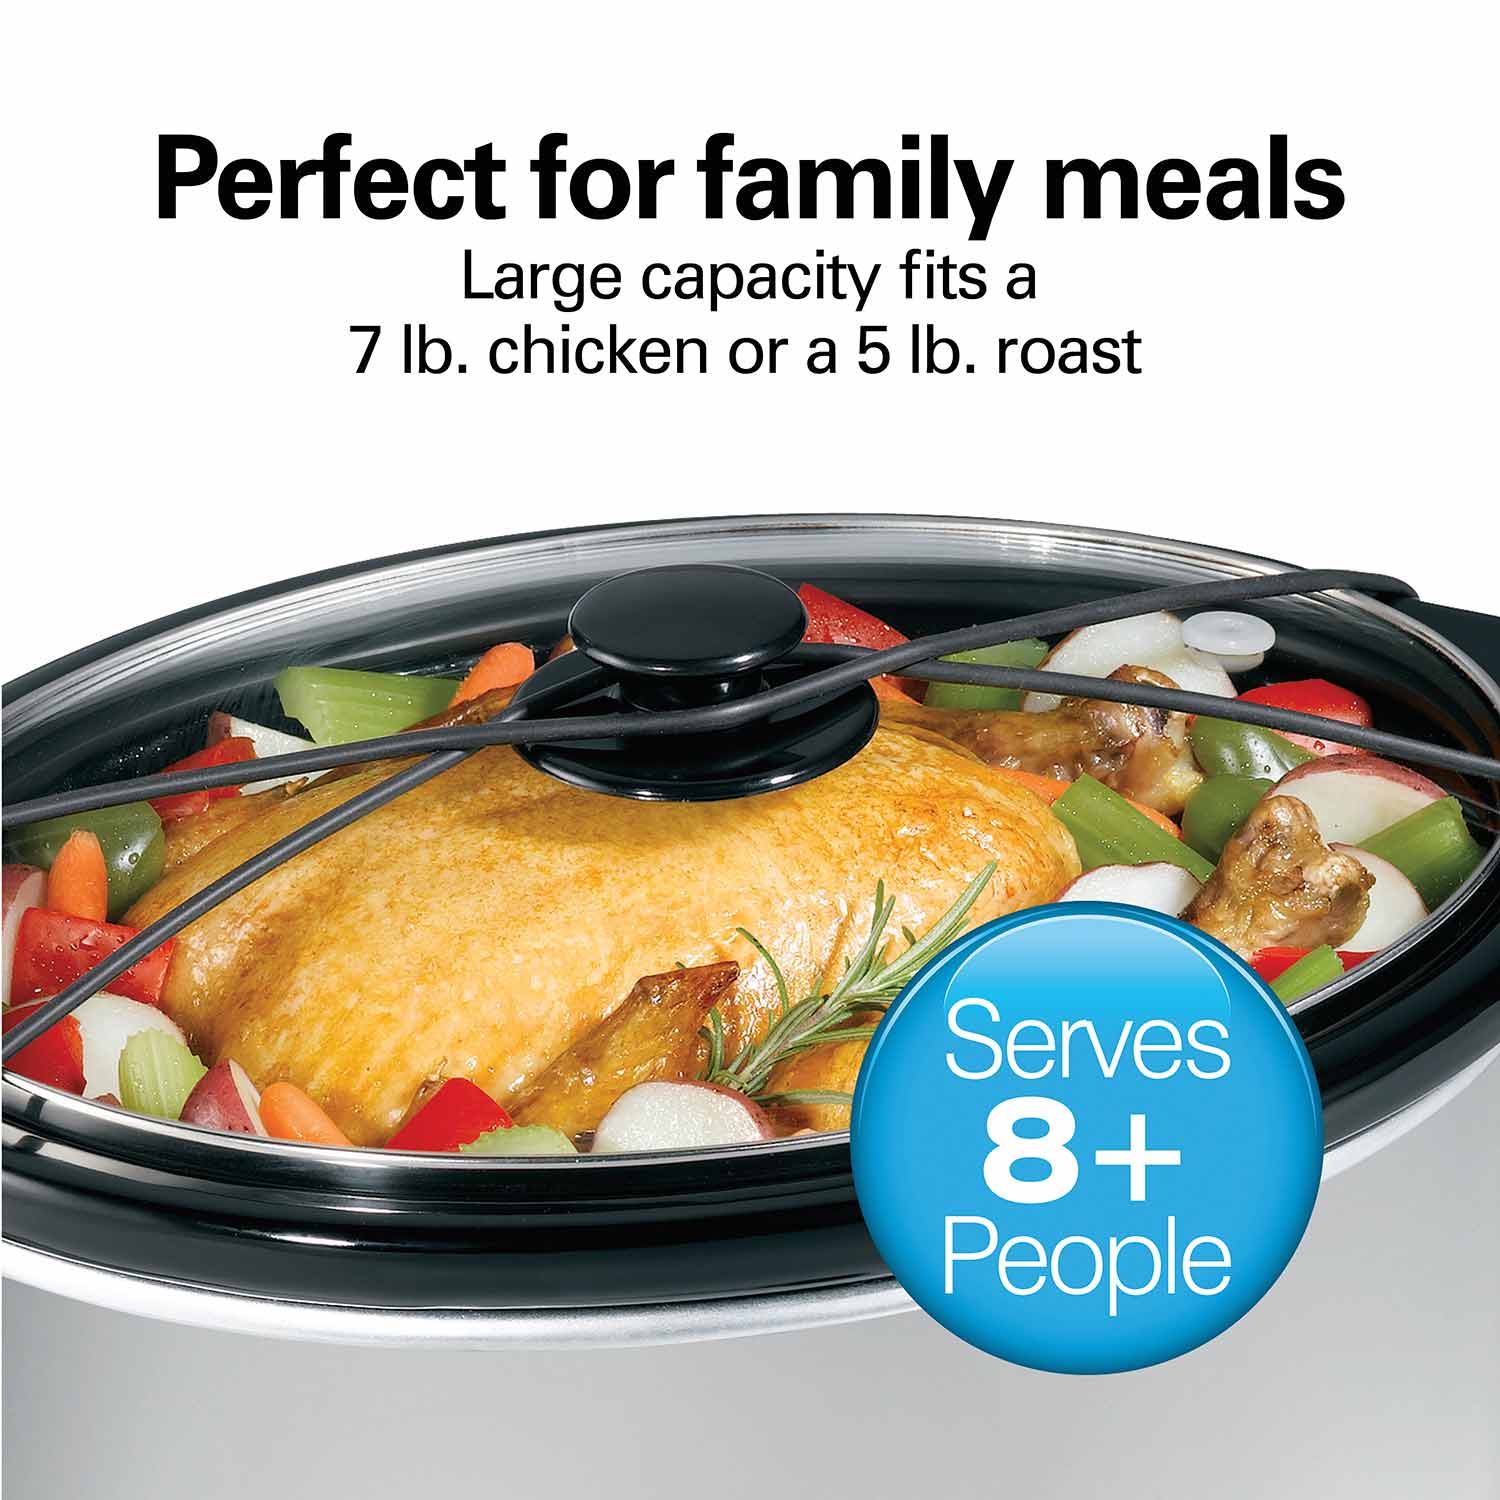 Hamilton Beach Slow Cooker, Extra Large 10 Quart, Black (33195) & Portable  7-Quart Programmable Slow Cooker With Lid Latch Strap for Easy Transport